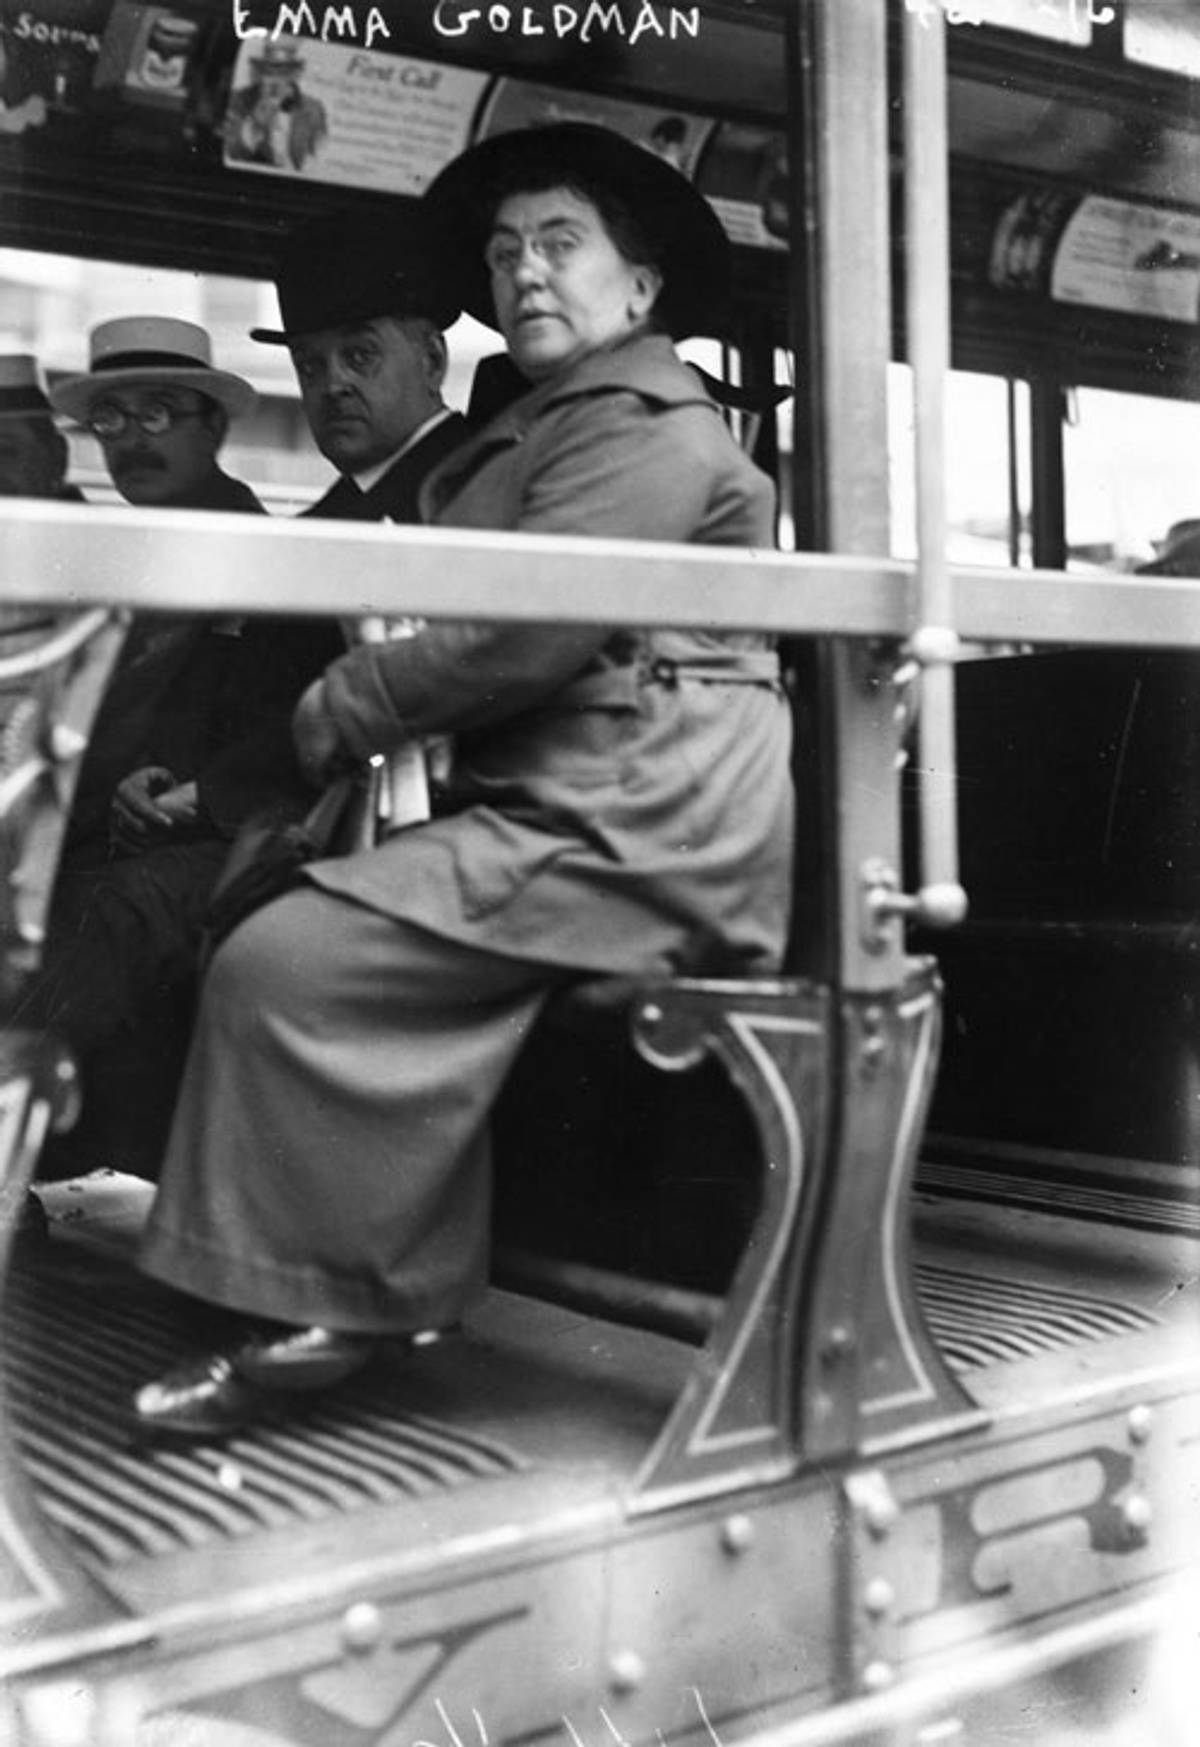 Emma Goldman on a streetcar, with Alexander Berkman, far left, in white hat, 1917. (Photo: Library of Congress)